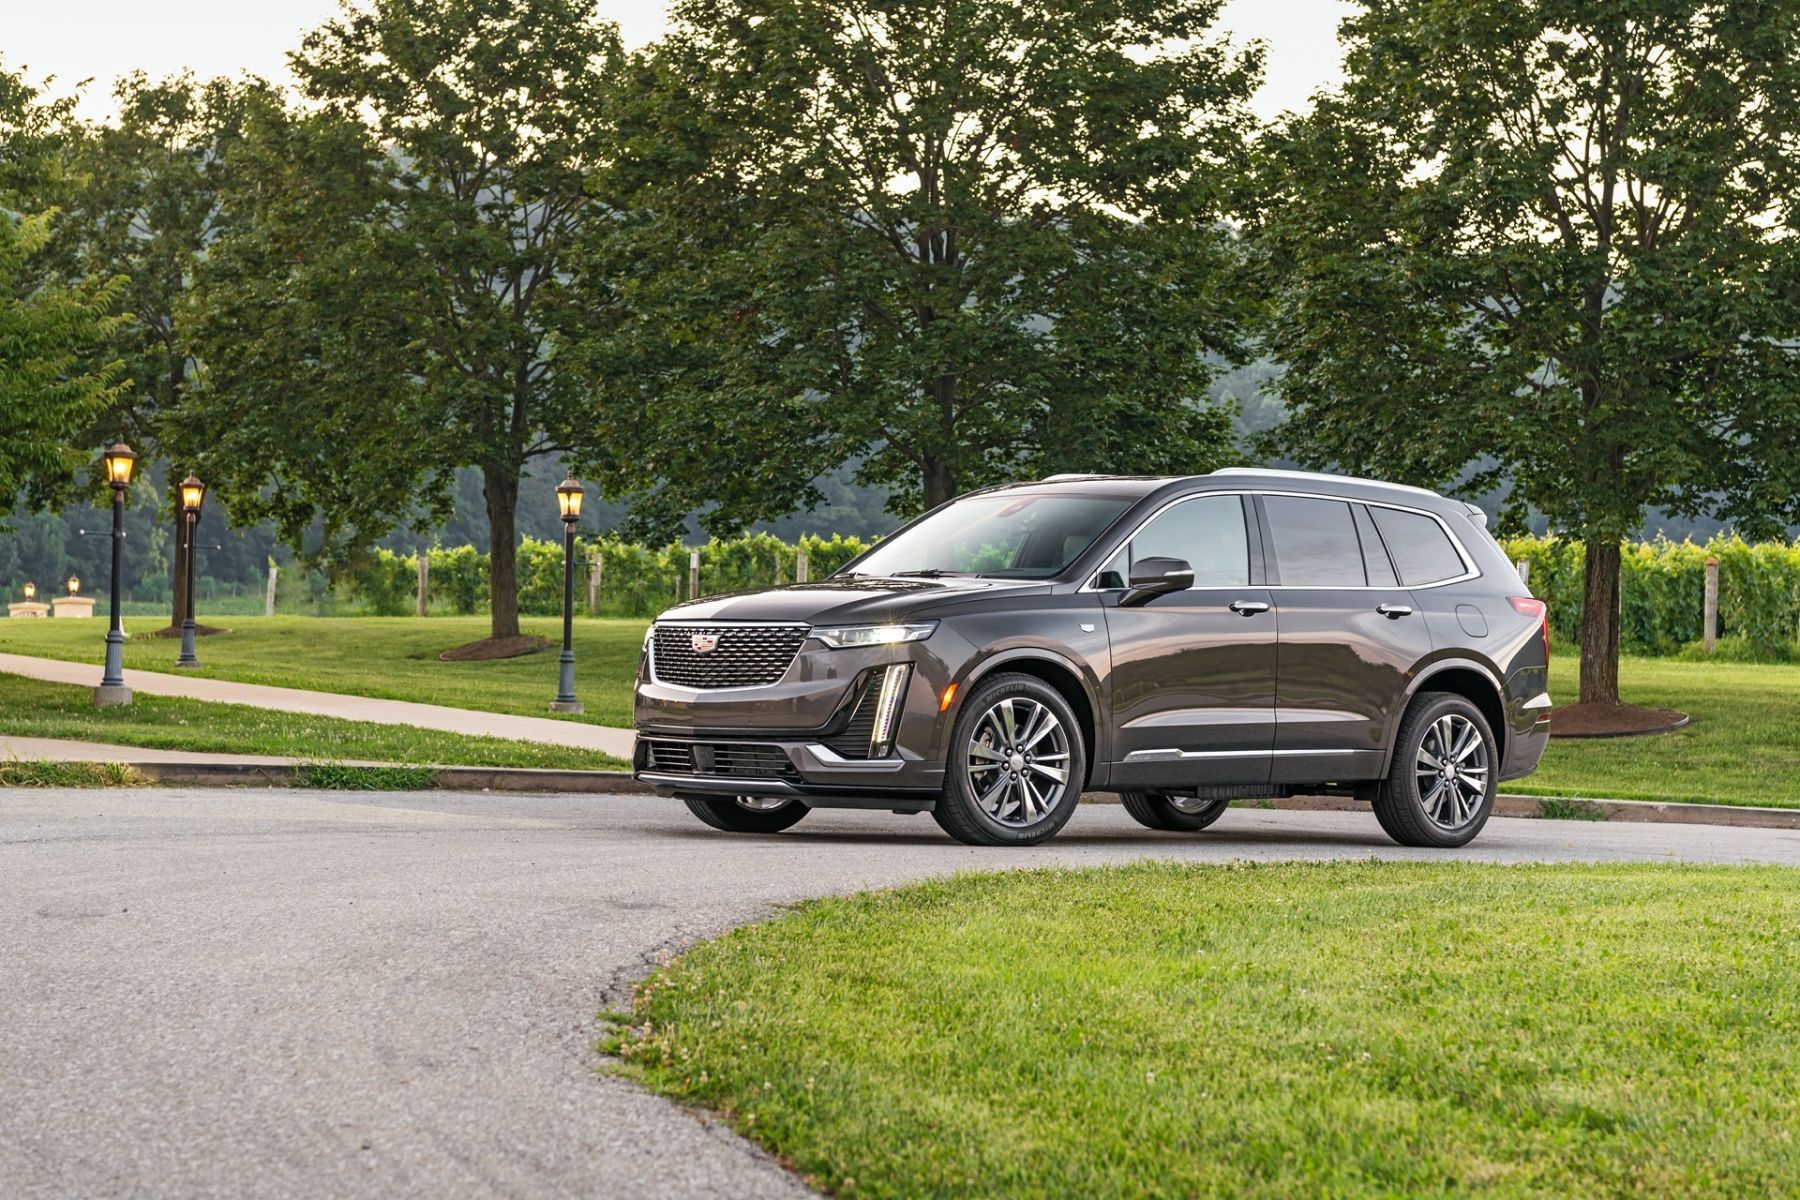 THE ALL-NEW 2020 CADILLAC XT6 IN TORONTO